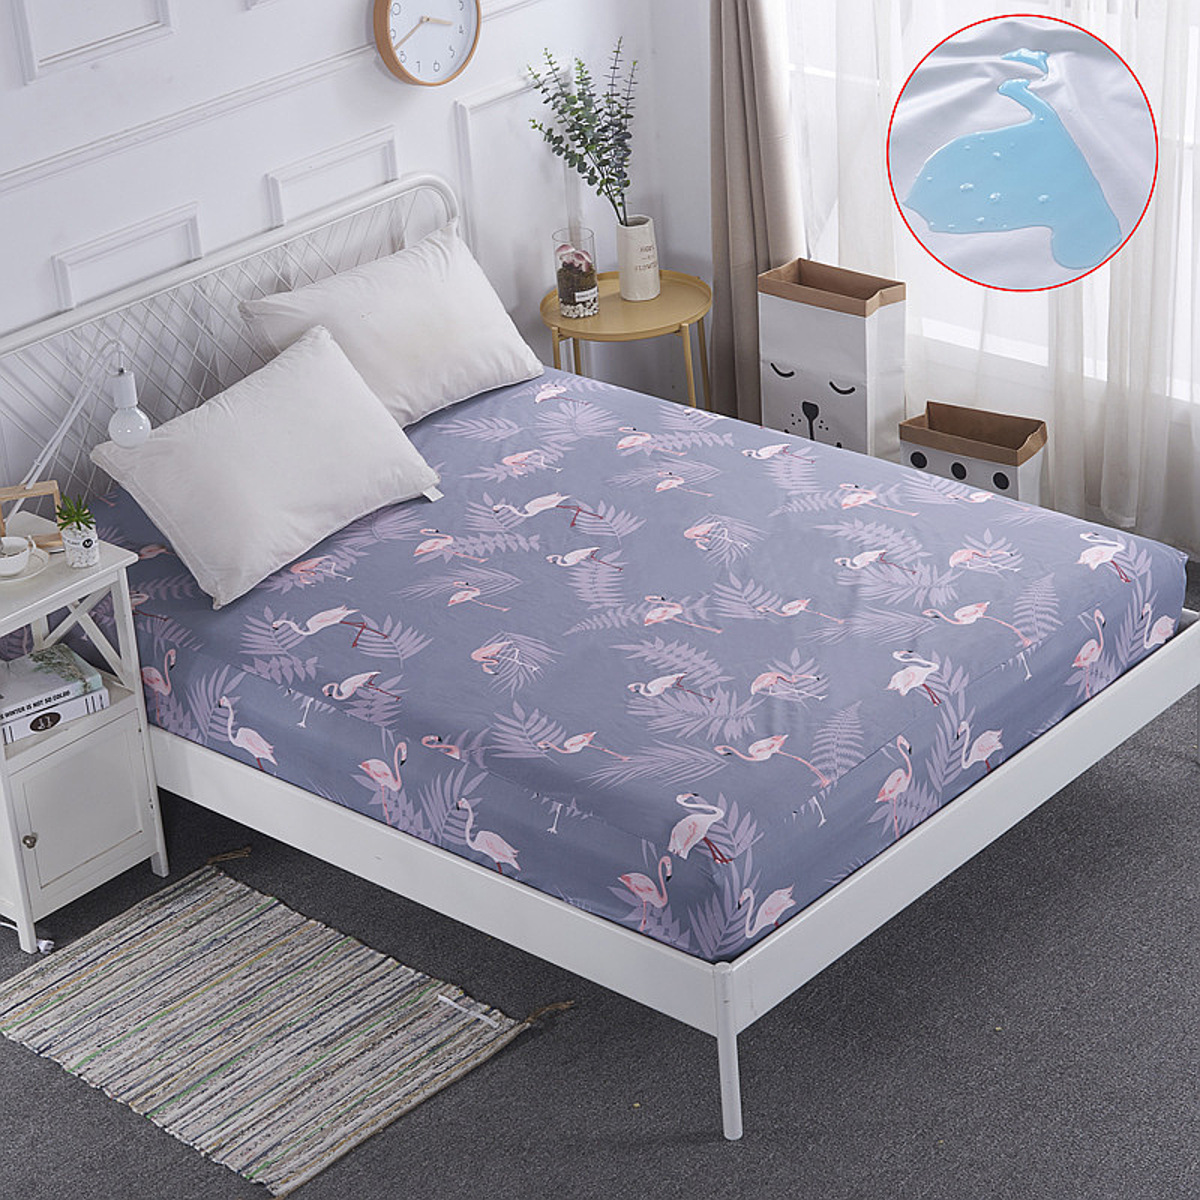 

Polyester Mattress Protector Pink Flamingo Bed Cover Air-Permeable & Machine-washable Bed Cover